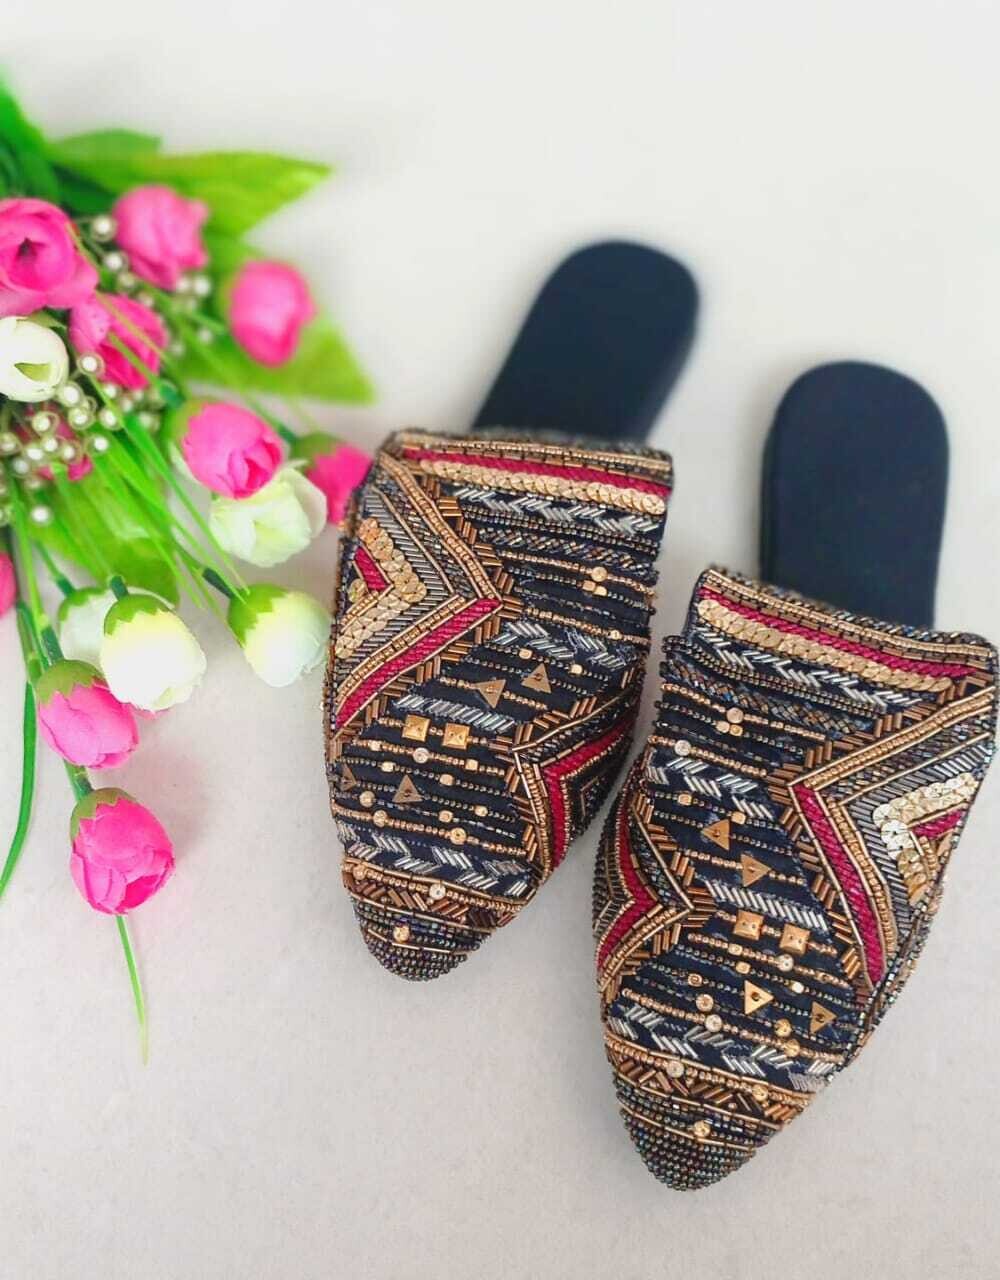 Newly Launched Embroidered Mules -25 pairs